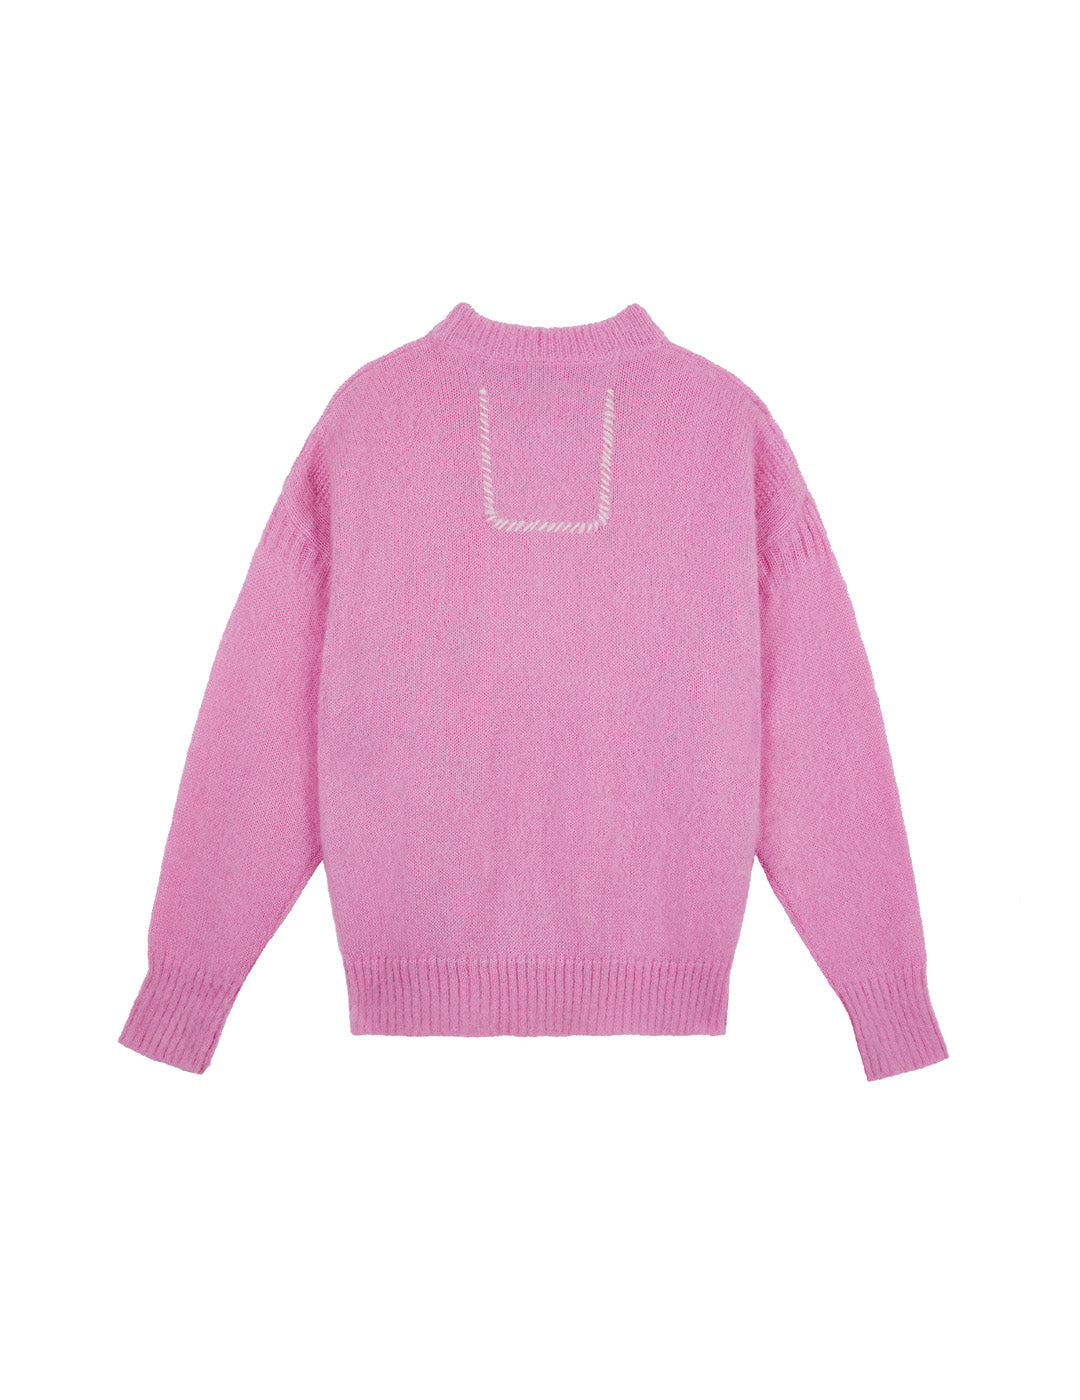 THE GUERNSEY JUMPER IN PINK MOHAIR